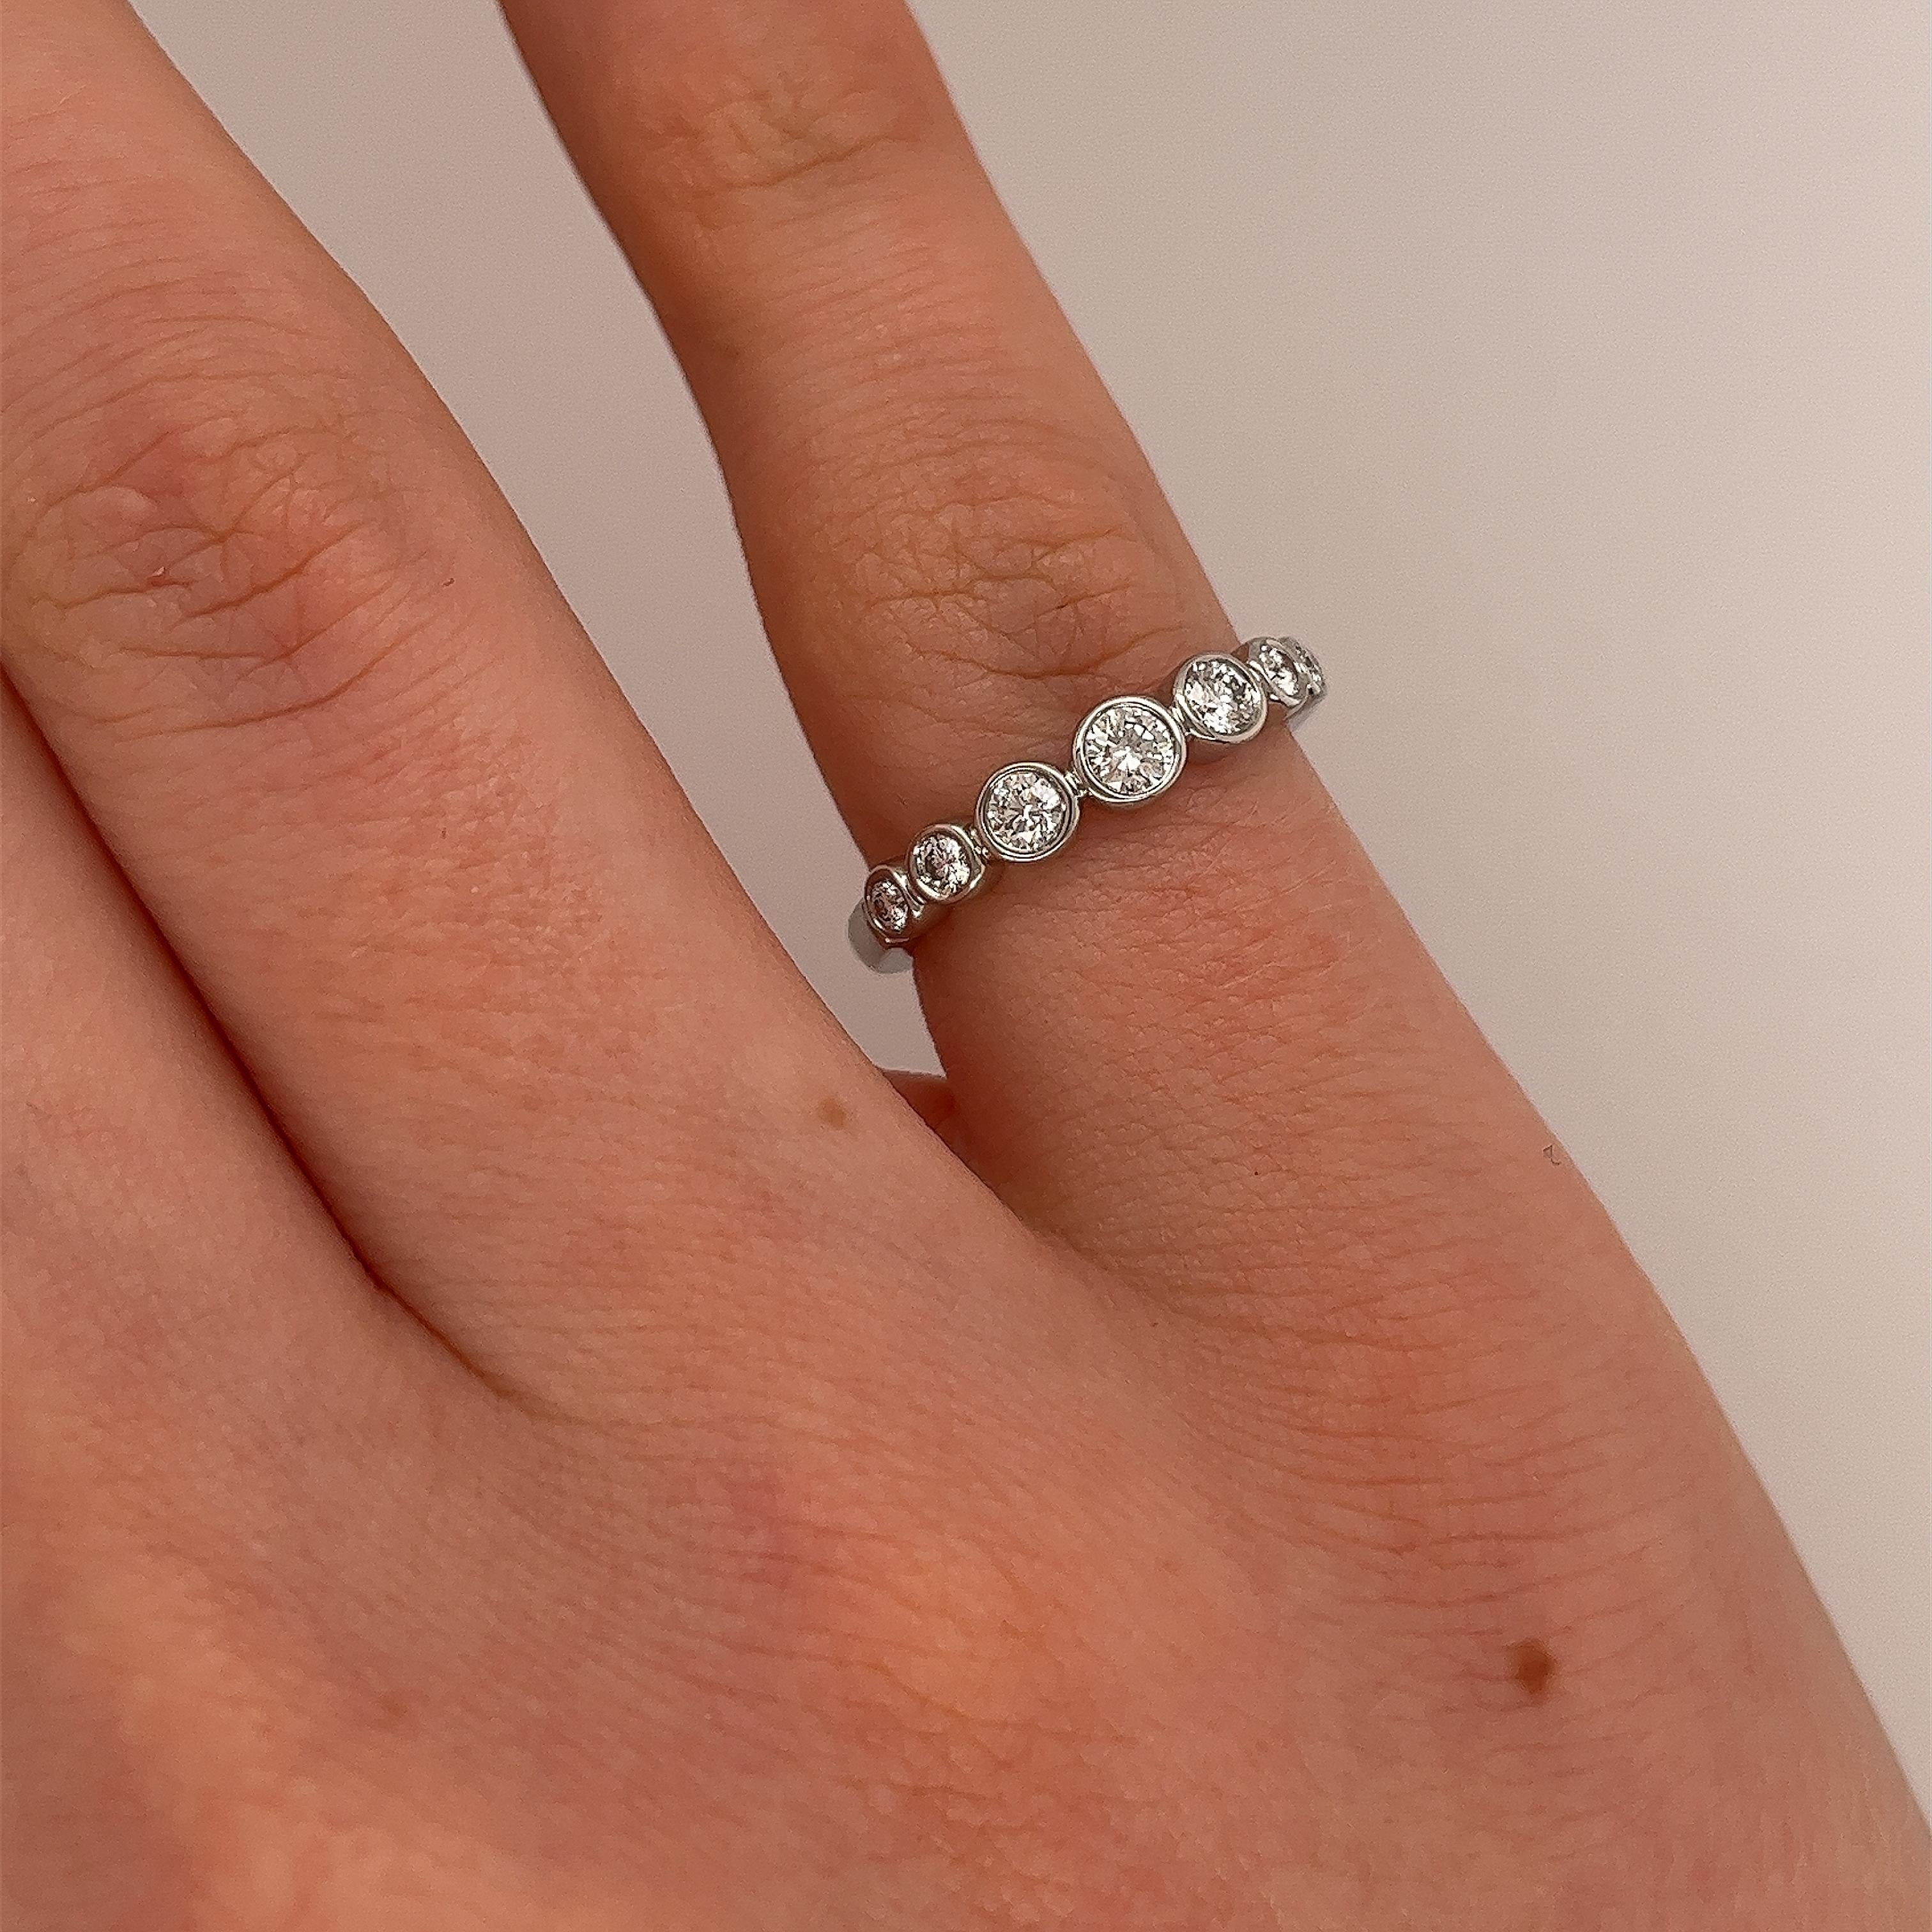 Women's Tiffany & Co Jazz Diamond Ring set with 7 stones in a graduated setting in plat For Sale